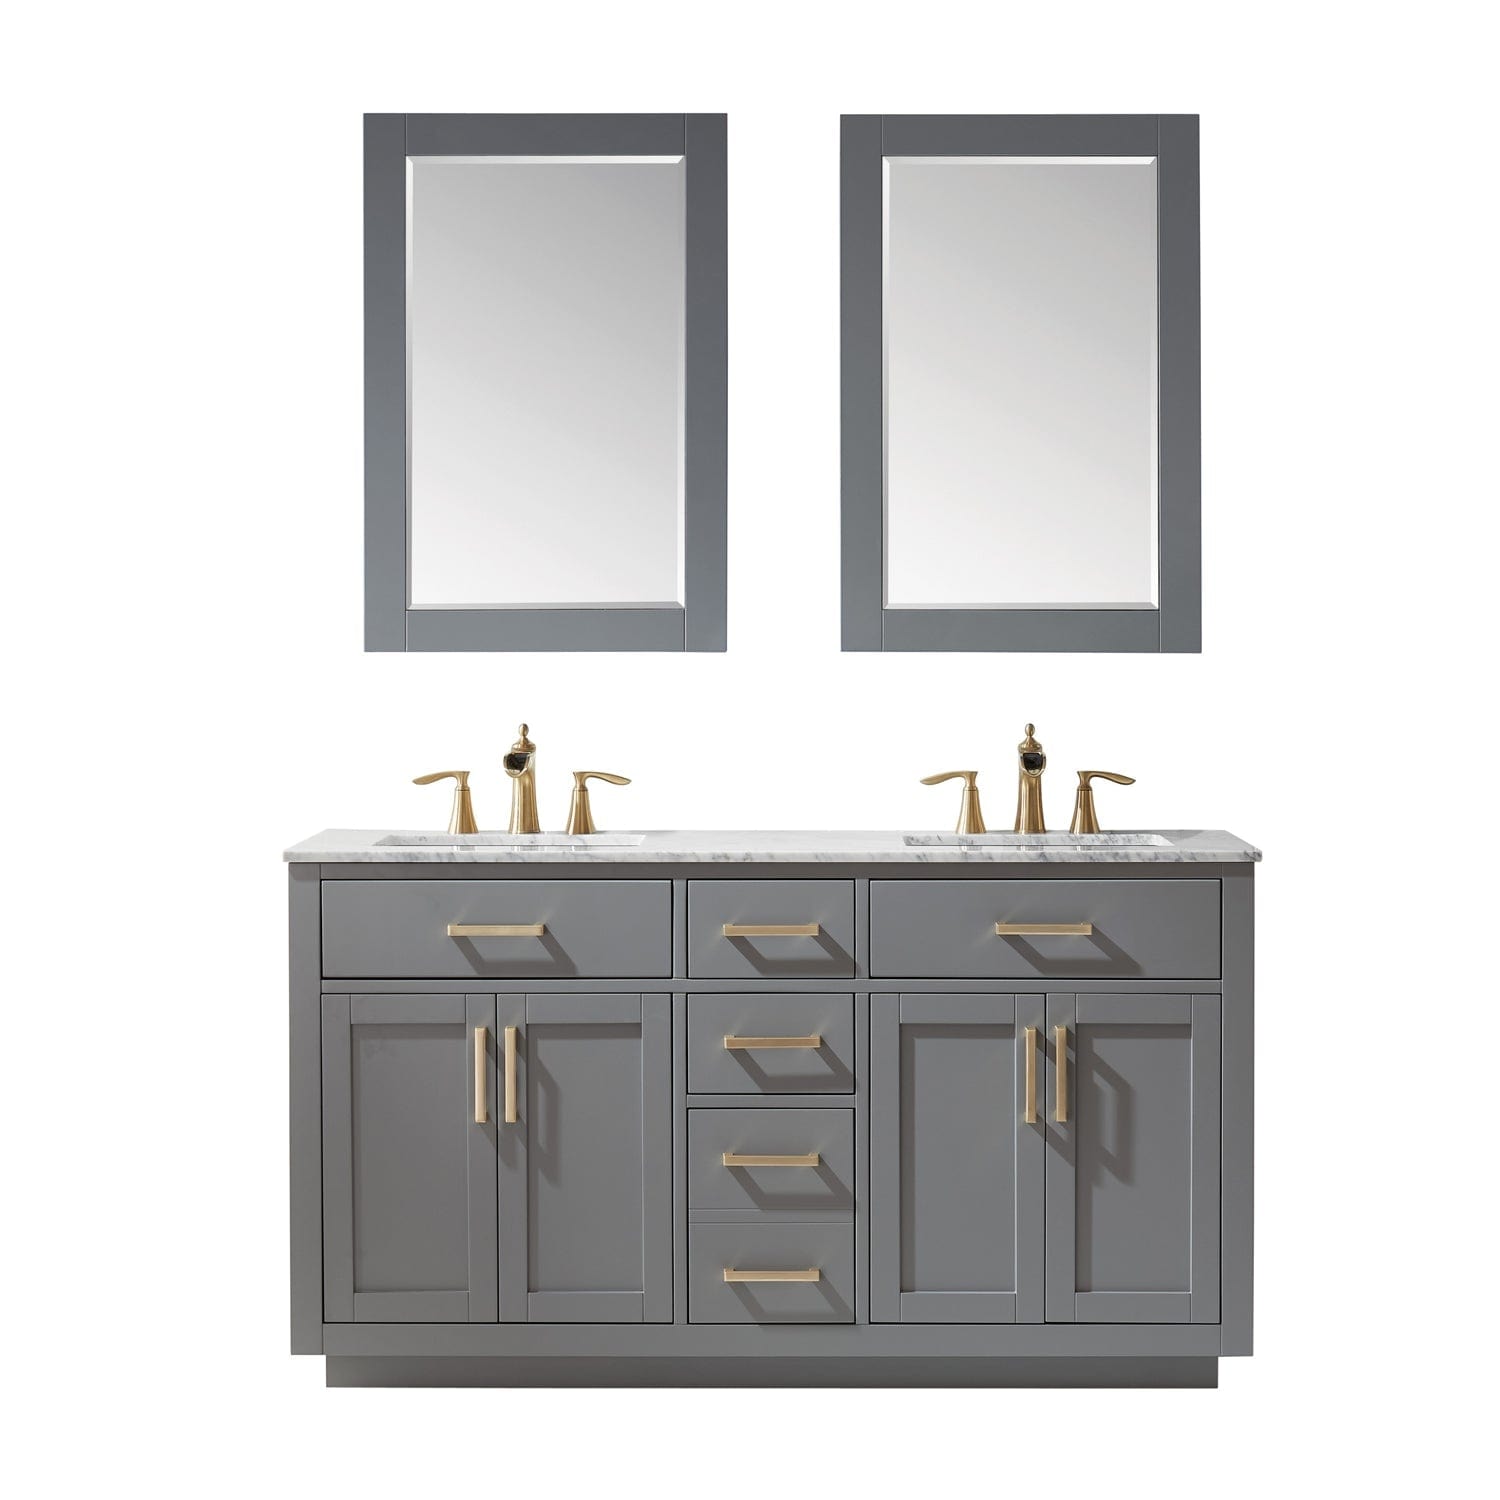 Altair Ivy 60" Double Bathroom Vanity Set in Gray and Carrara White Marble Countertop with Mirror 531060-GR-CA - Molaix631112971218Vanity531060-GR-CA